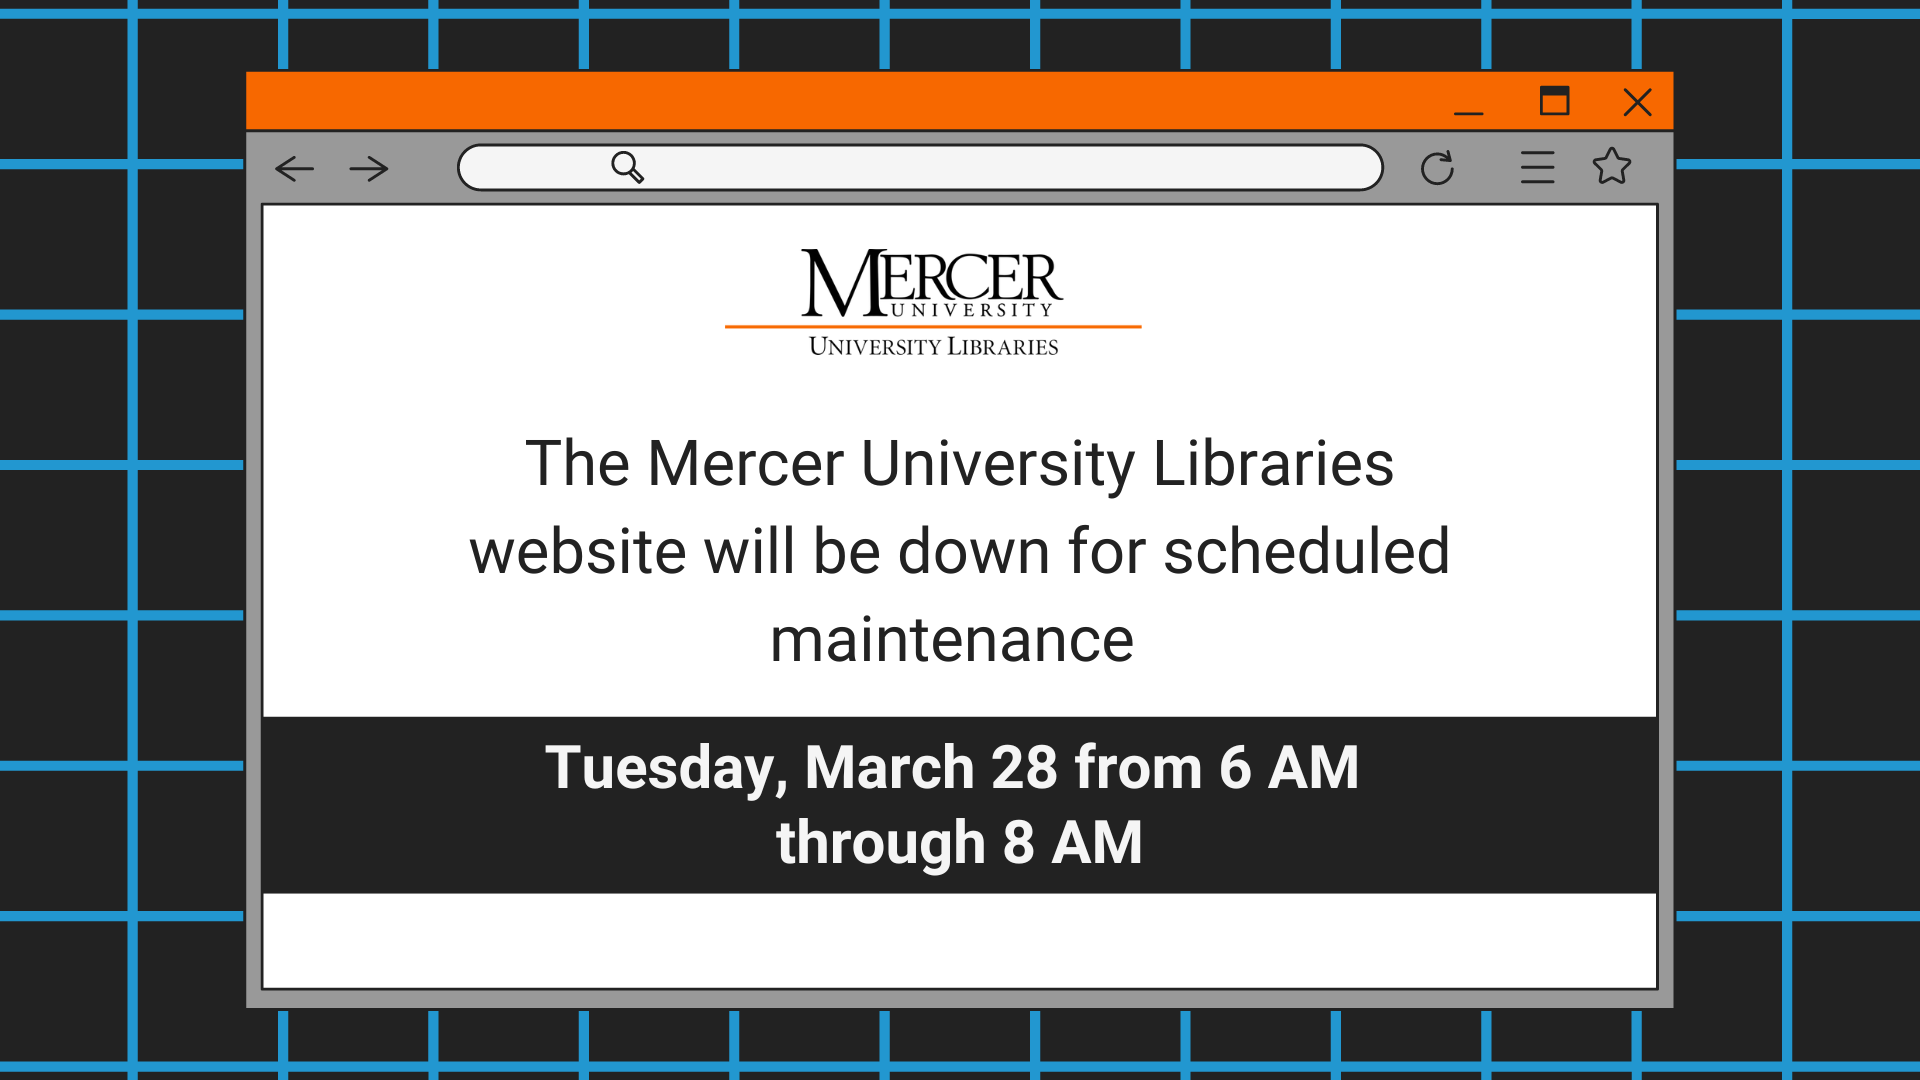 The Mercer University Libraries website will be down for scheduled maintenance Tuesday, March 28 from 6 A.M. through 8 A.M.